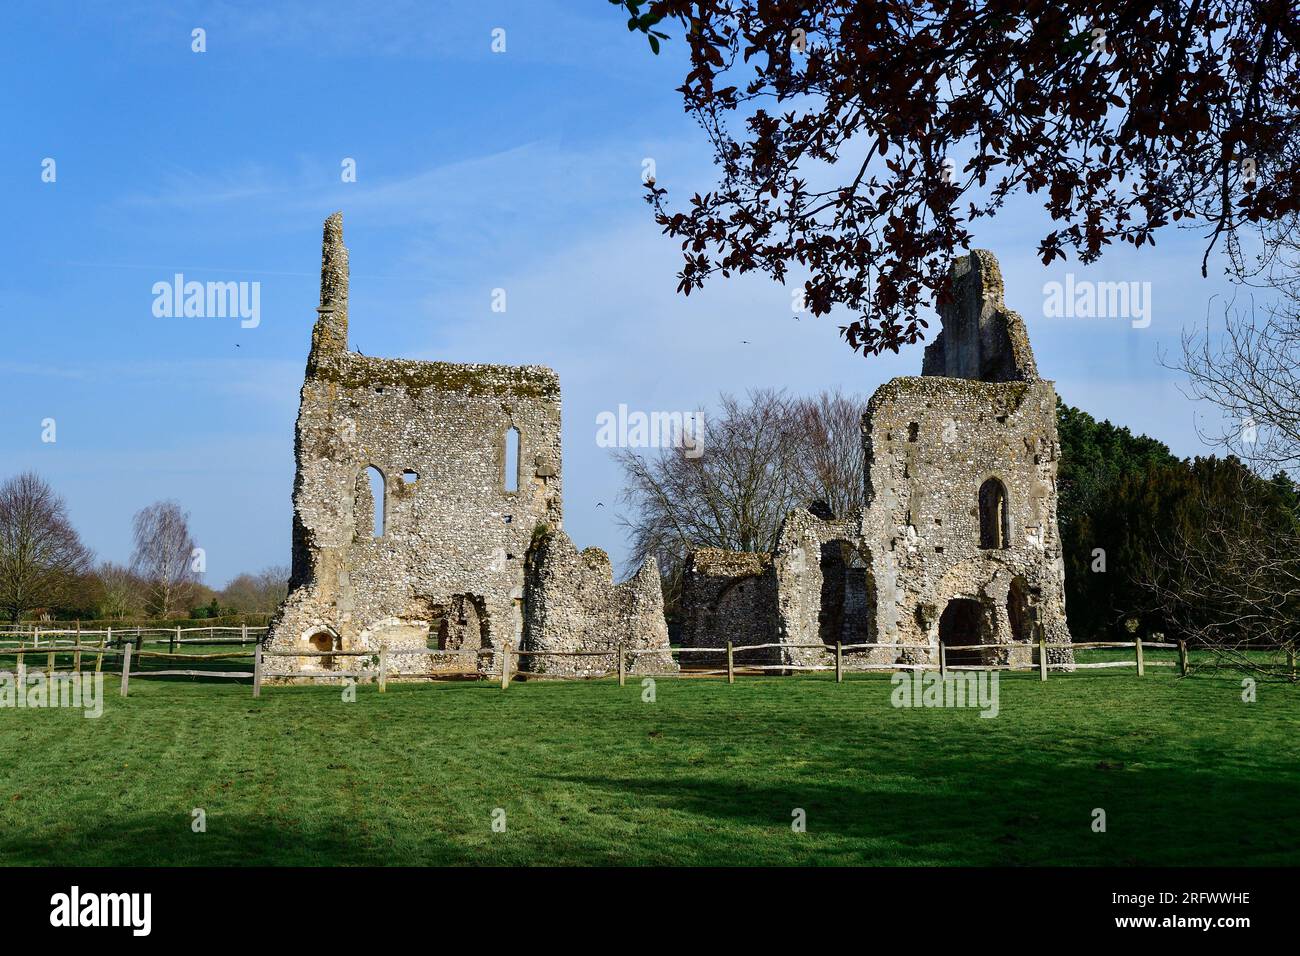 Boxgrove Priory is a small monastery of Benedictine monks in the village of Boxgrove in Sussex, England. It was founded in the 12th century. Stock Photo